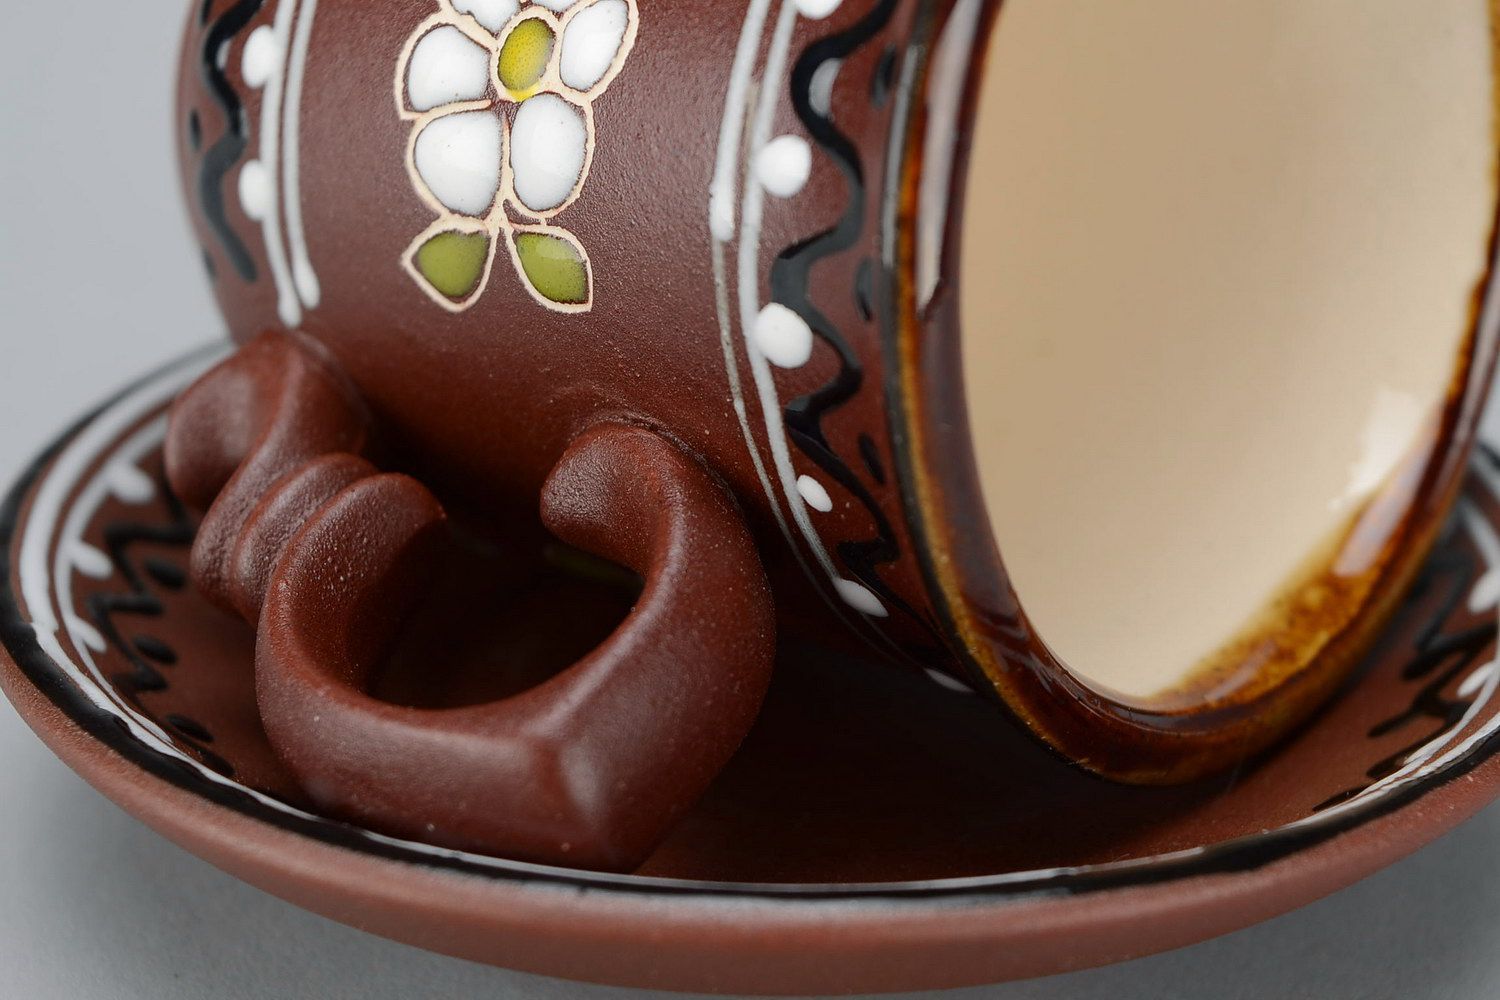 2 oz ceramic glazed decorative brown espresso cup with handle, saucer, and floral pattern photo 4